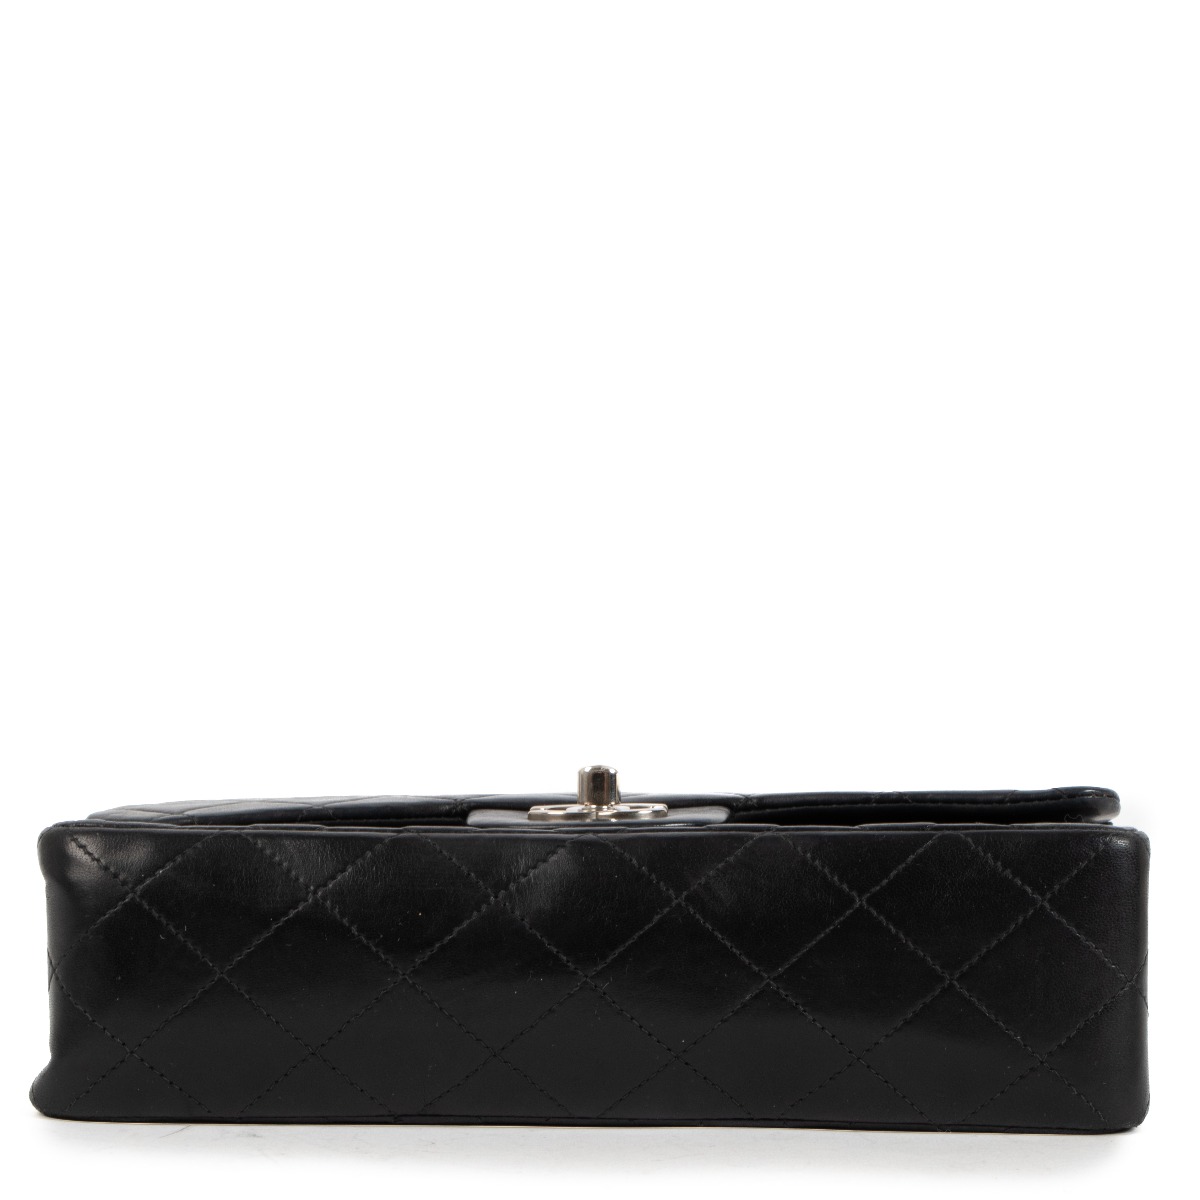 Classic Quilted So Black Lambskin Square Mini Flap